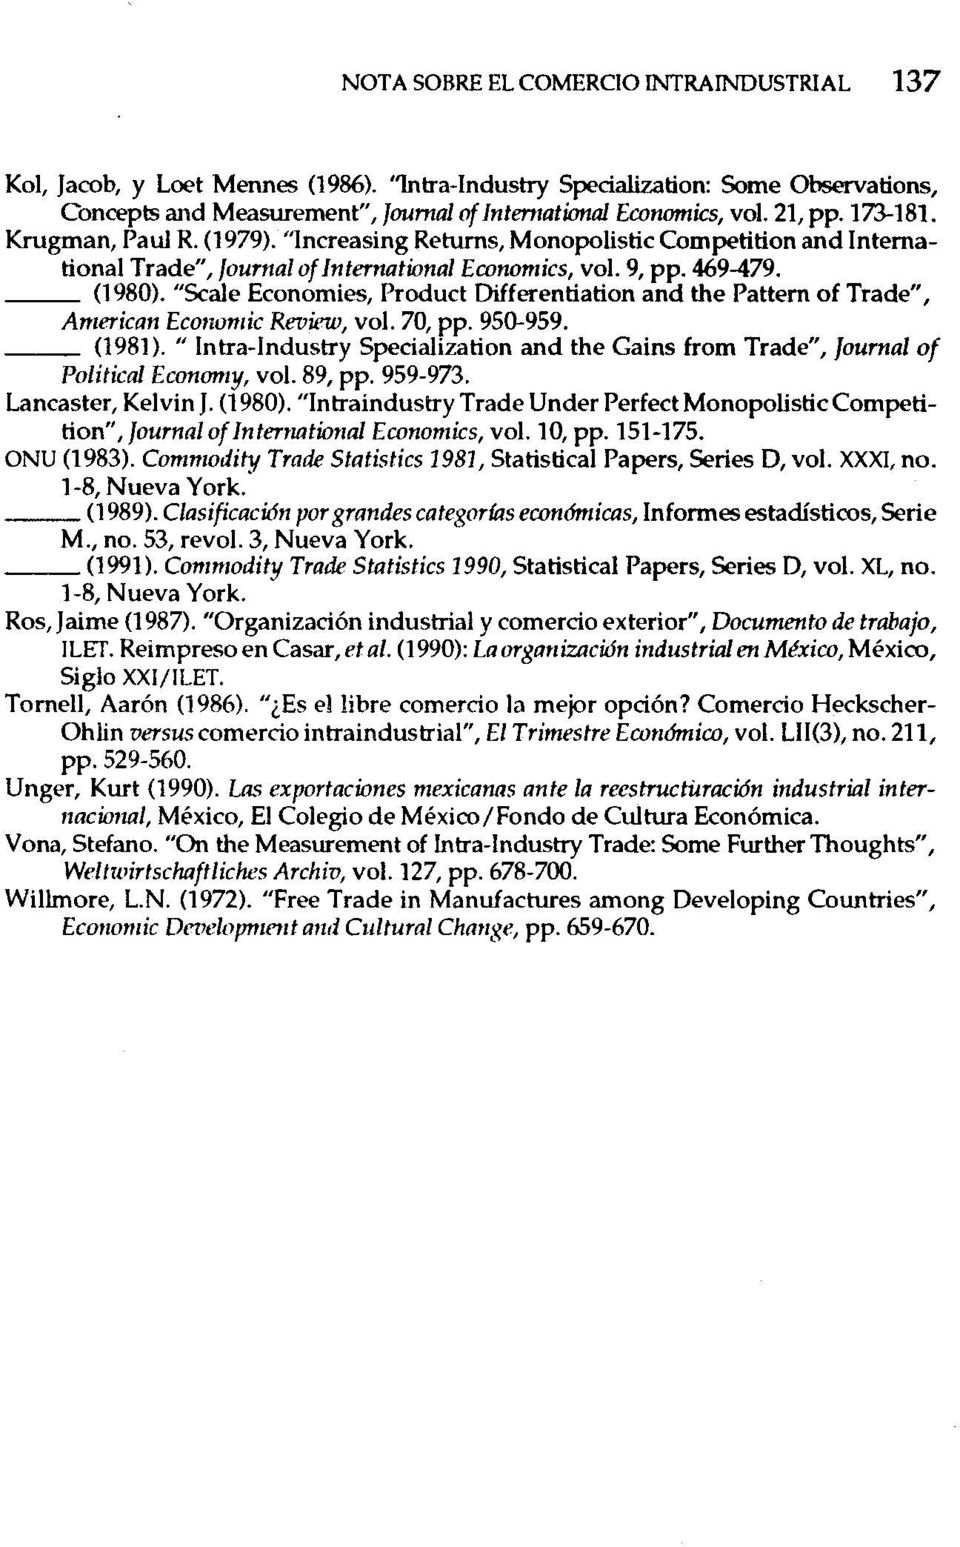 "Scale Economies, Product Differentiation and the Pattern of Trade", American Economic Review, vol. 70, pp. 950-959. (1981).